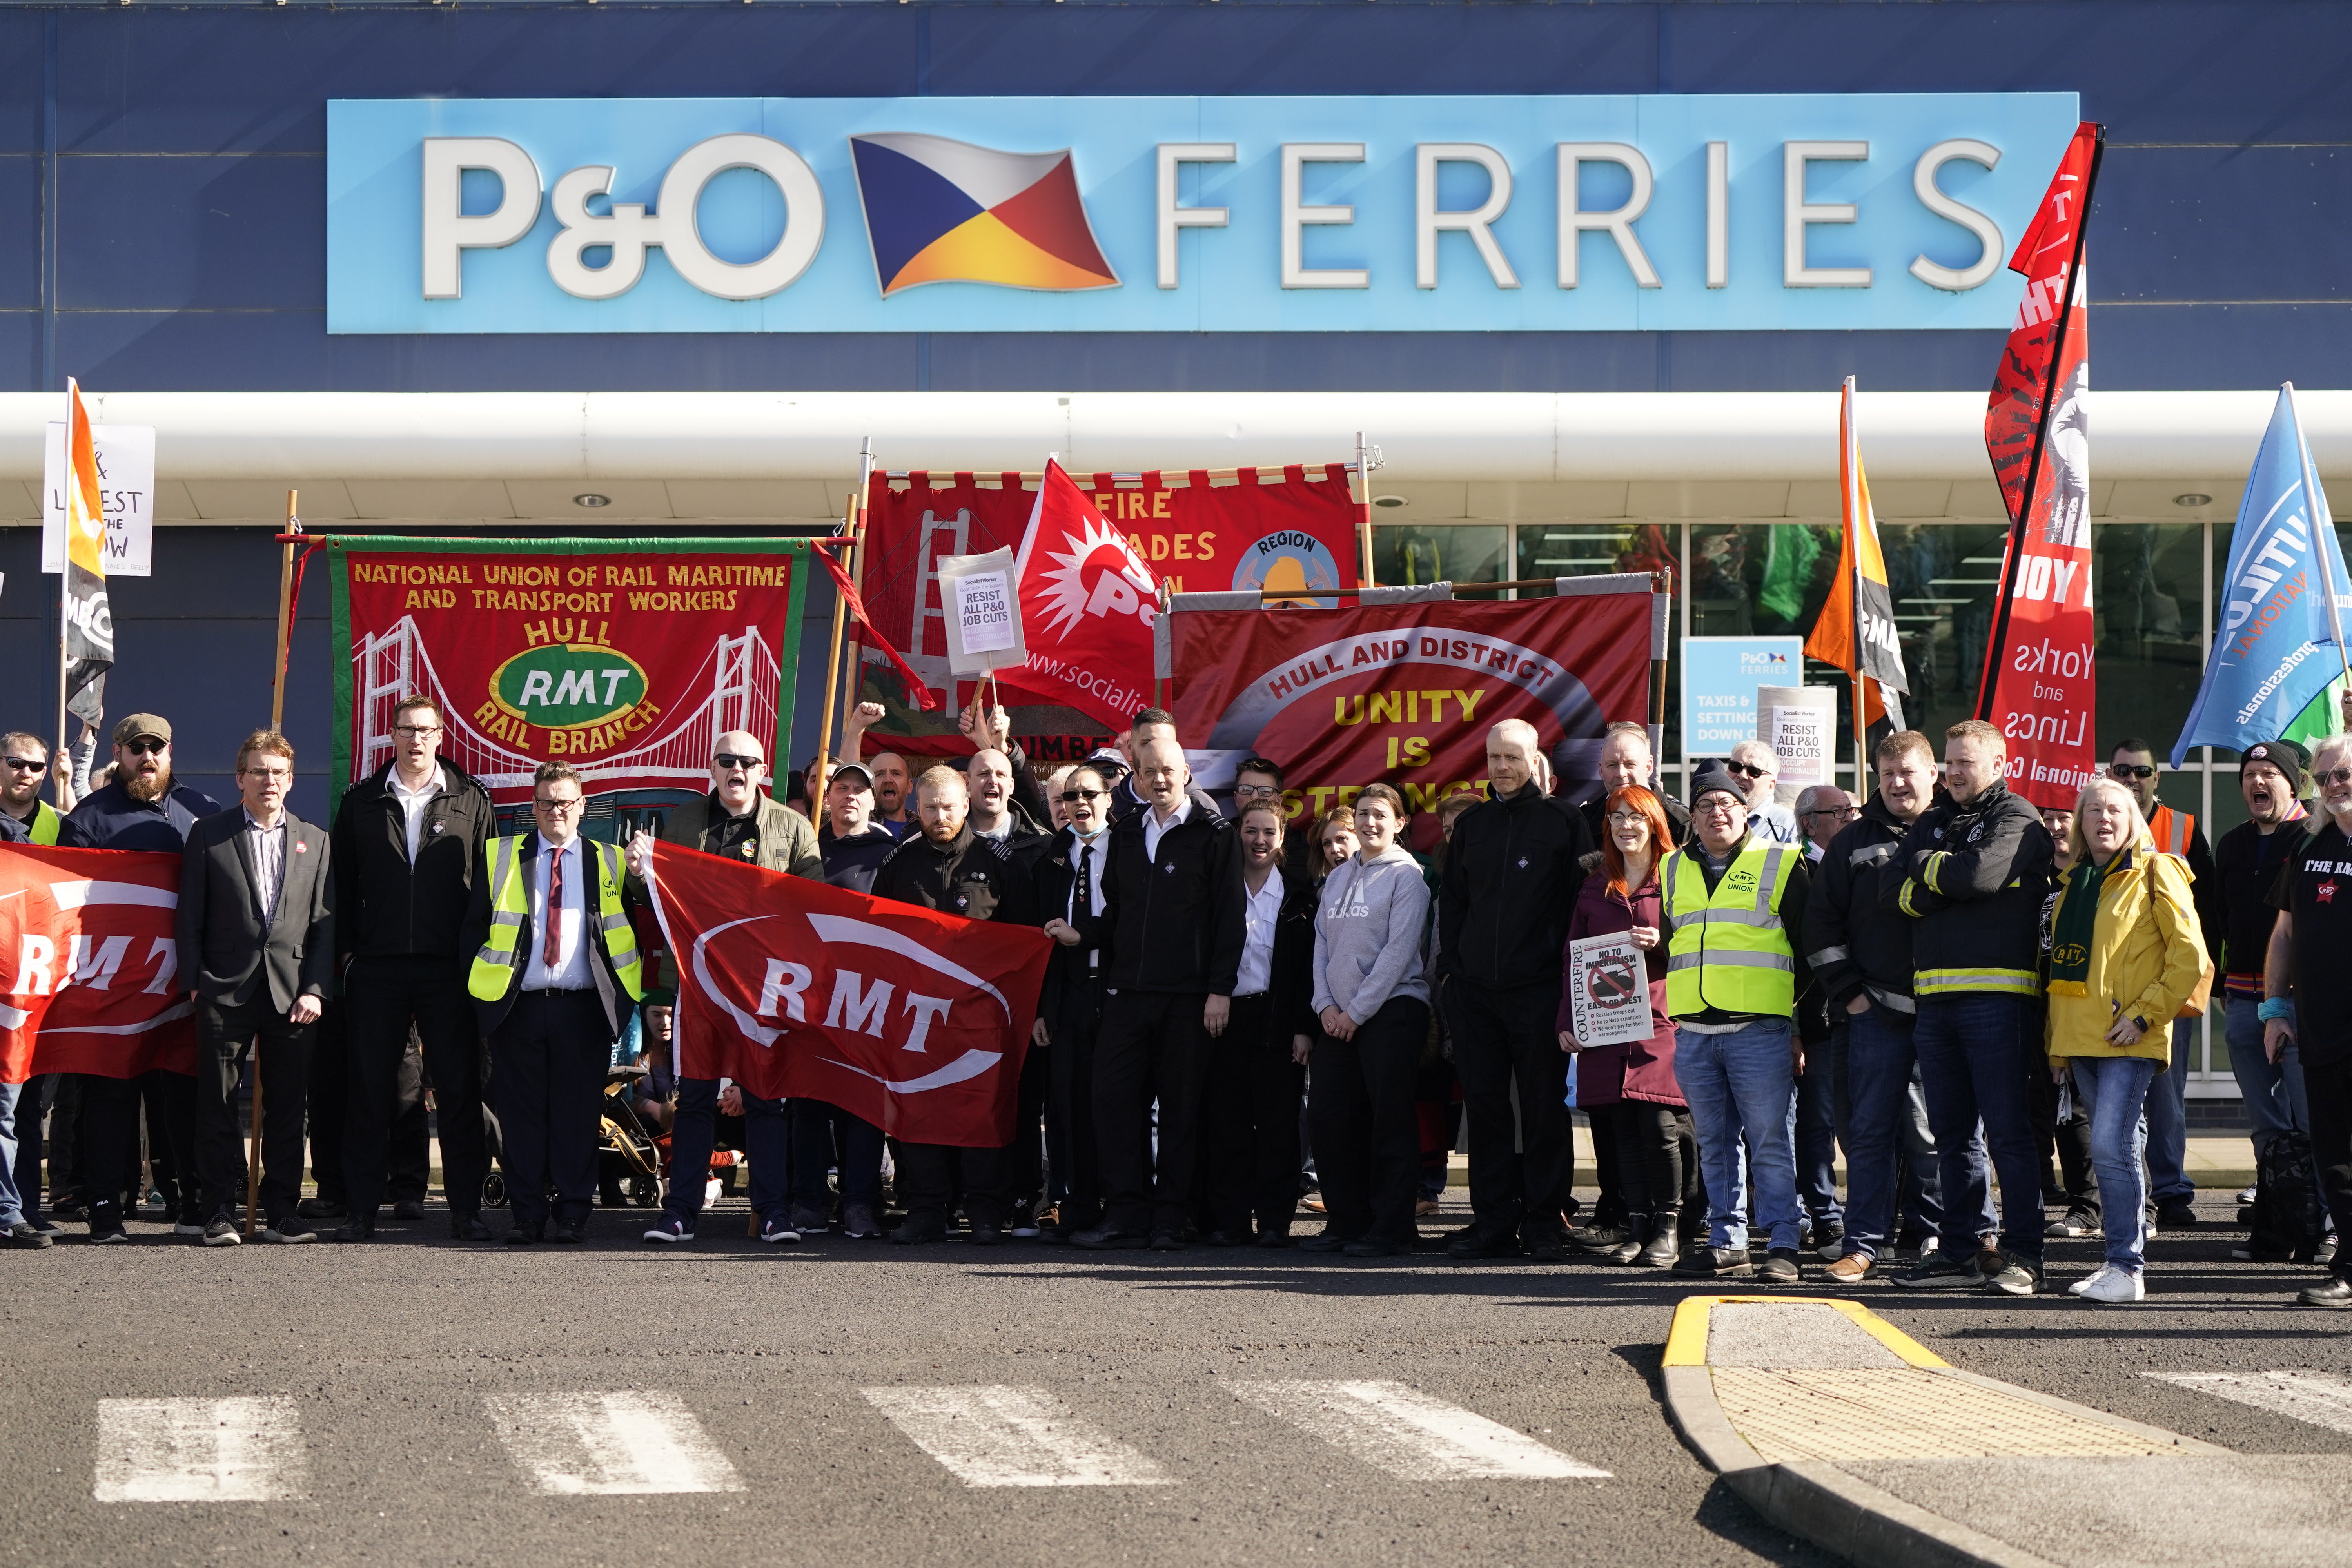 Protesters stand outside the P&O building at the Port of Hull (Danny Lawson/PA)